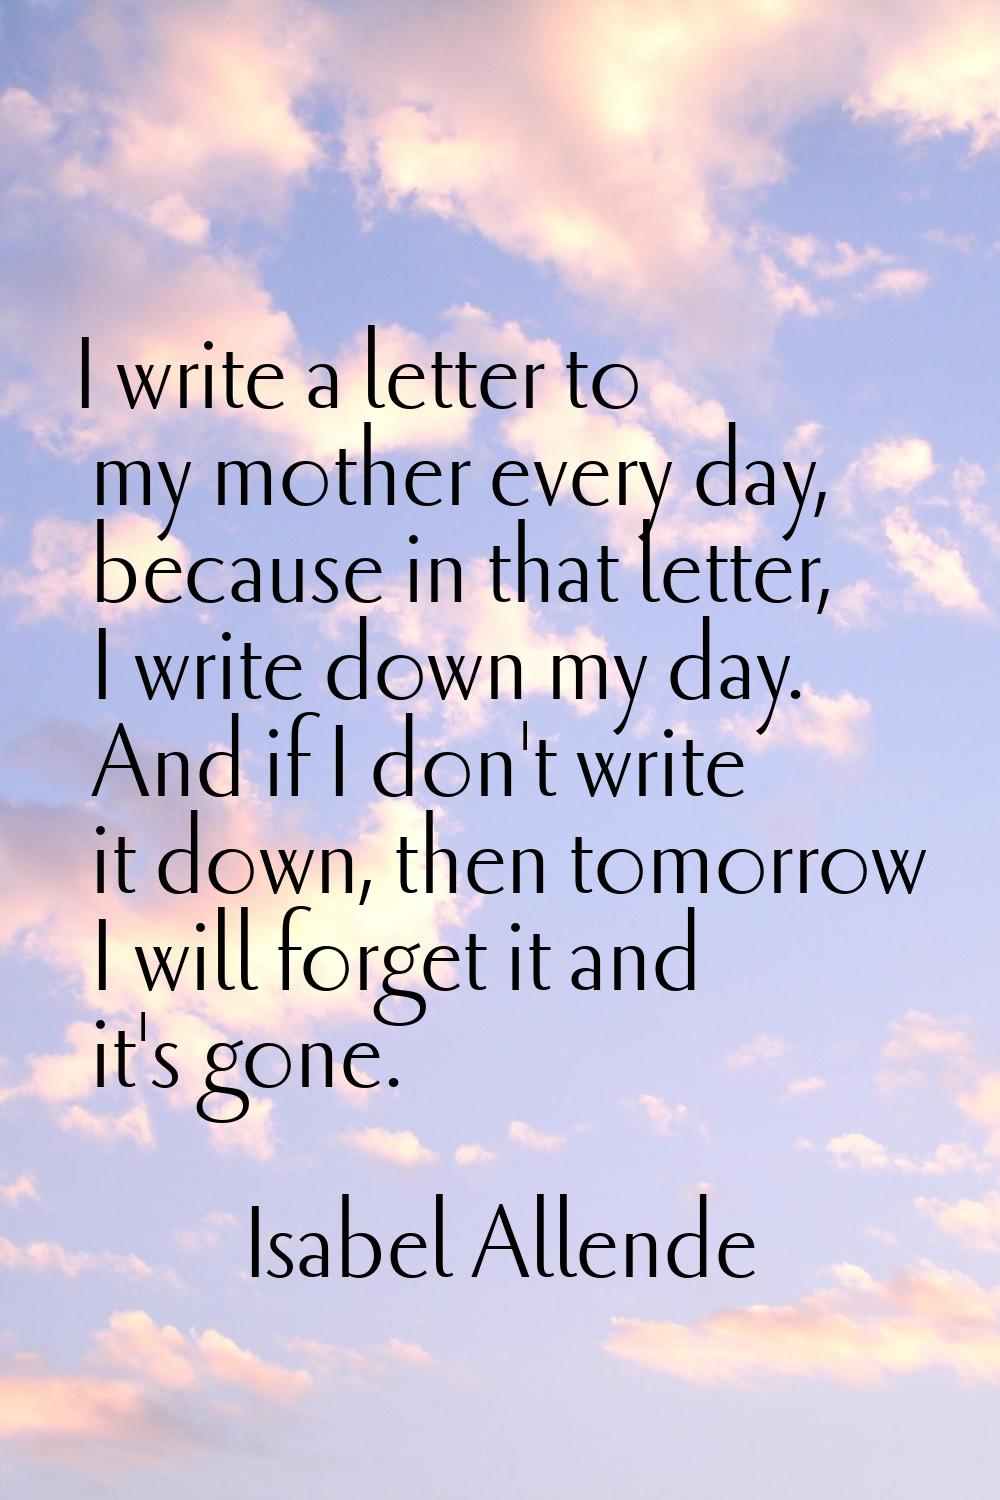 I write a letter to my mother every day, because in that letter, I write down my day. And if I don'